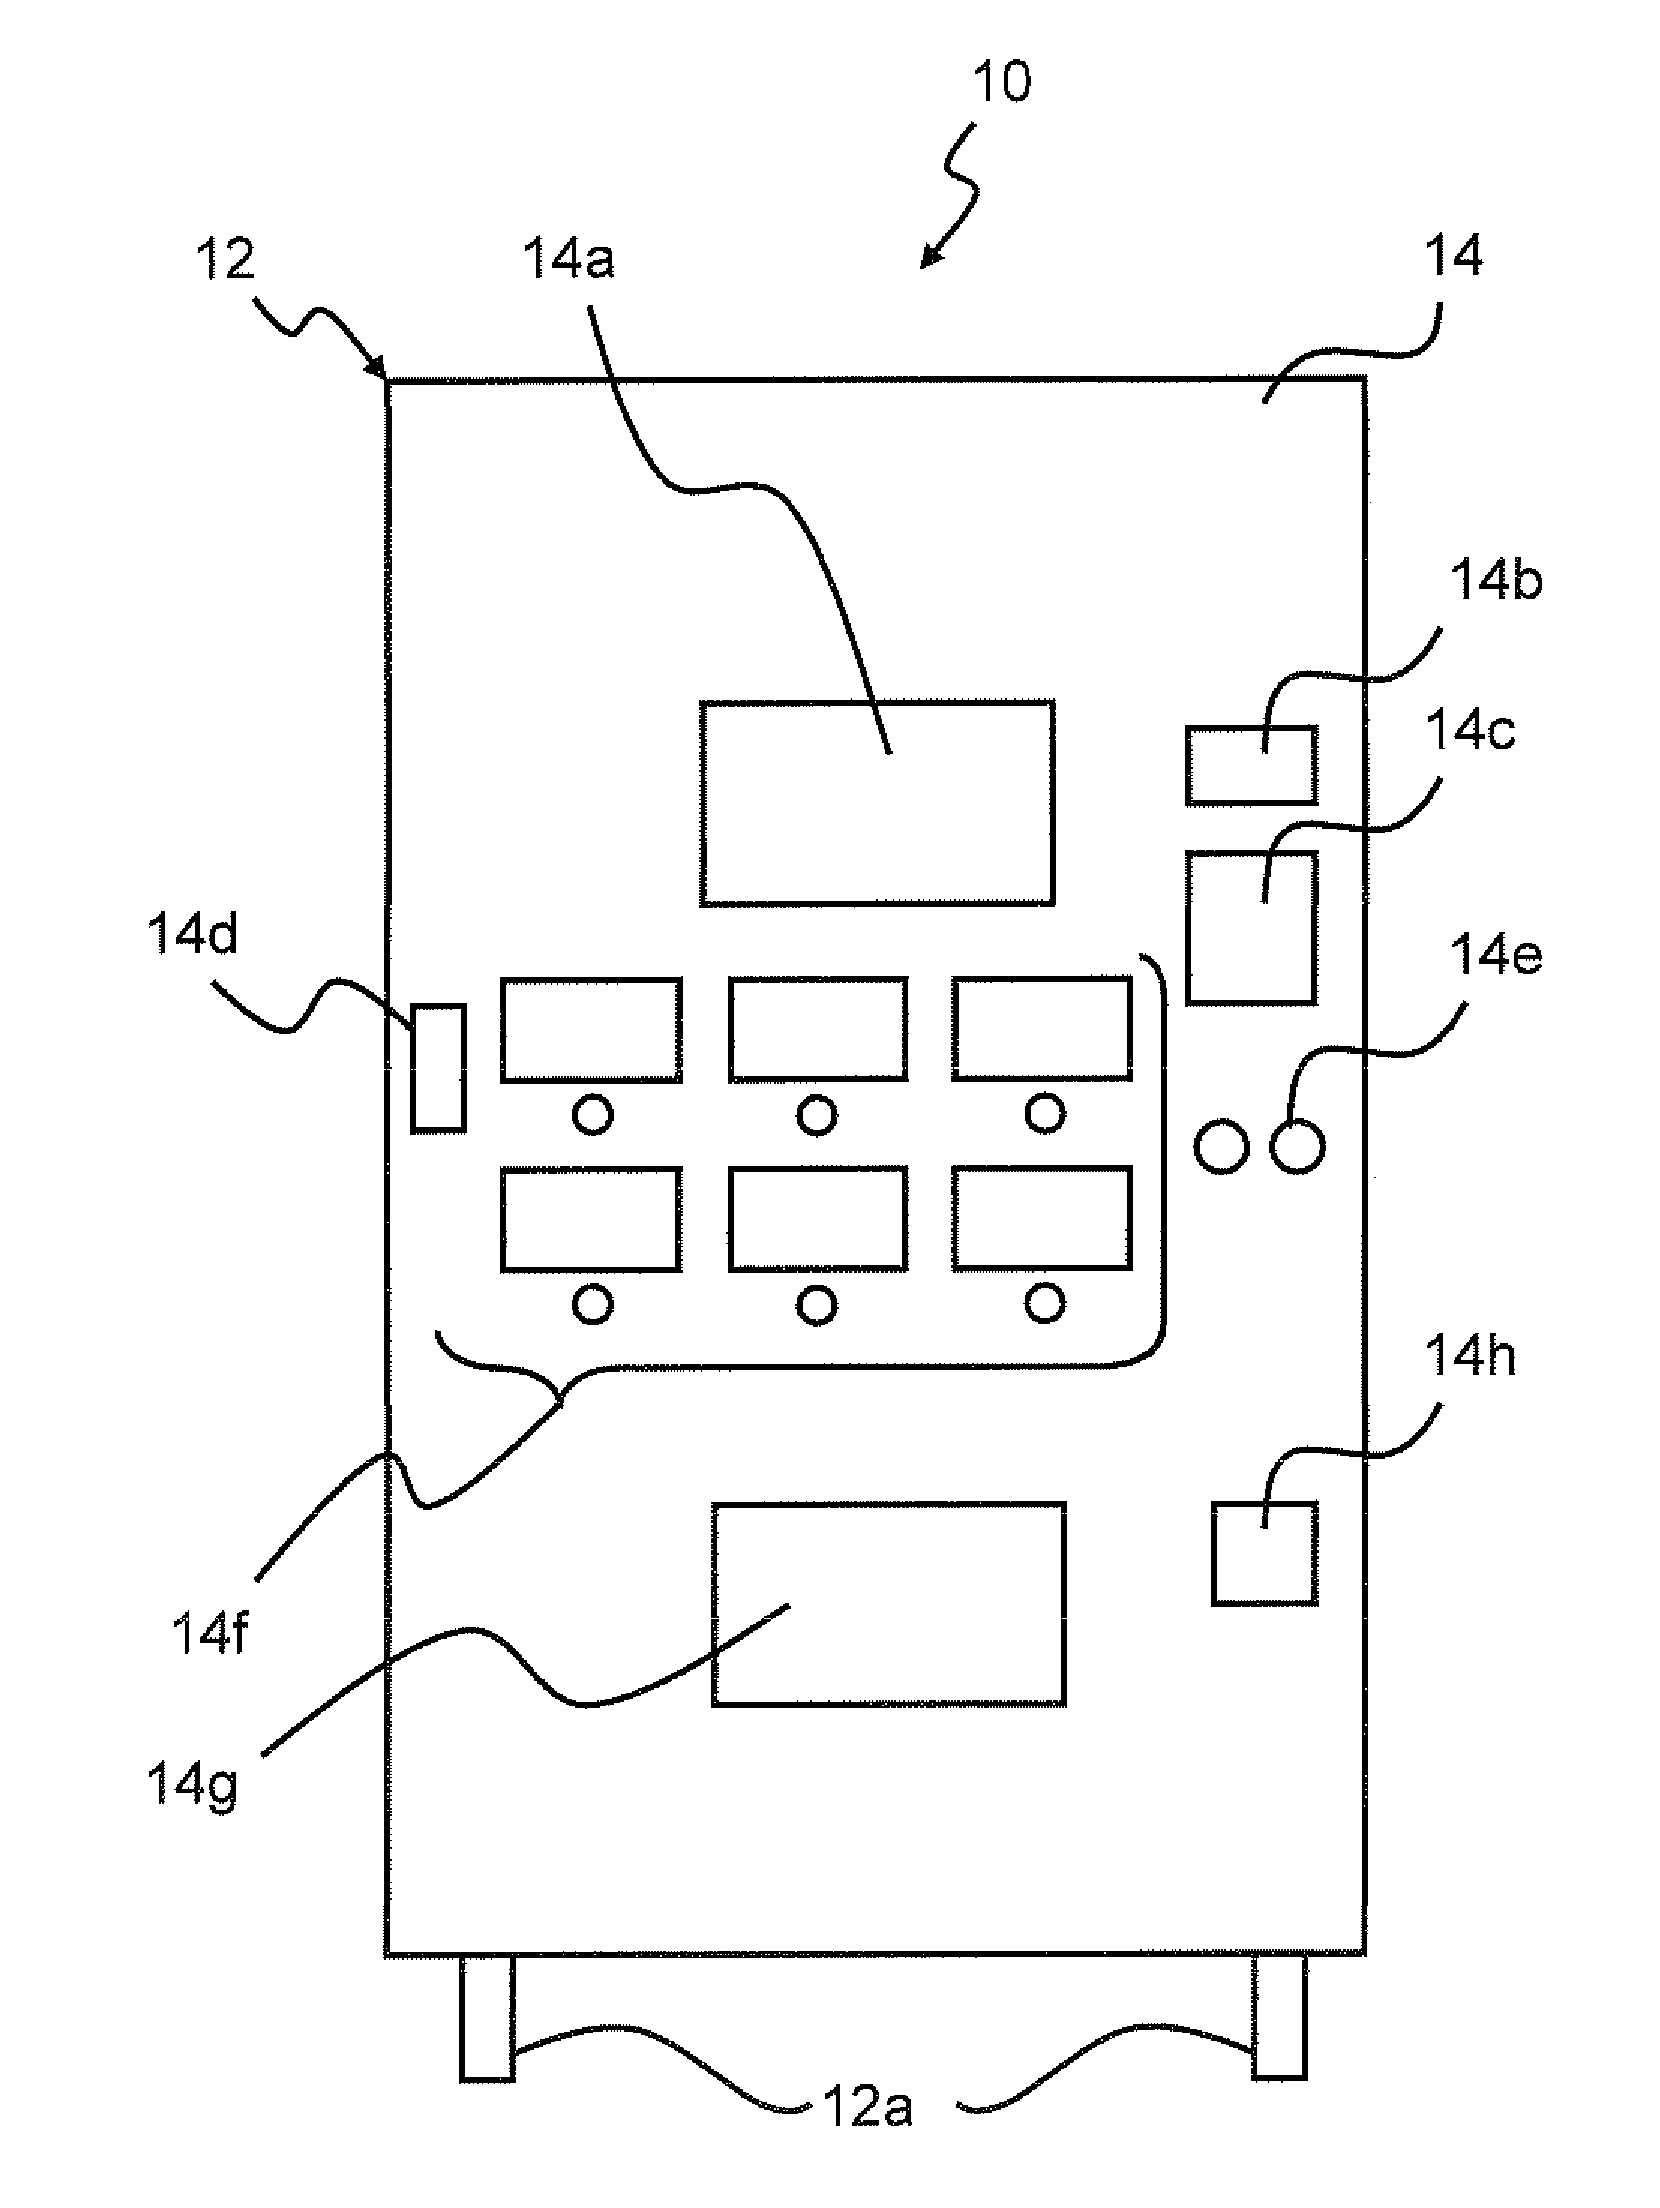 Automated hot food vending machine for pre-packaged food articles